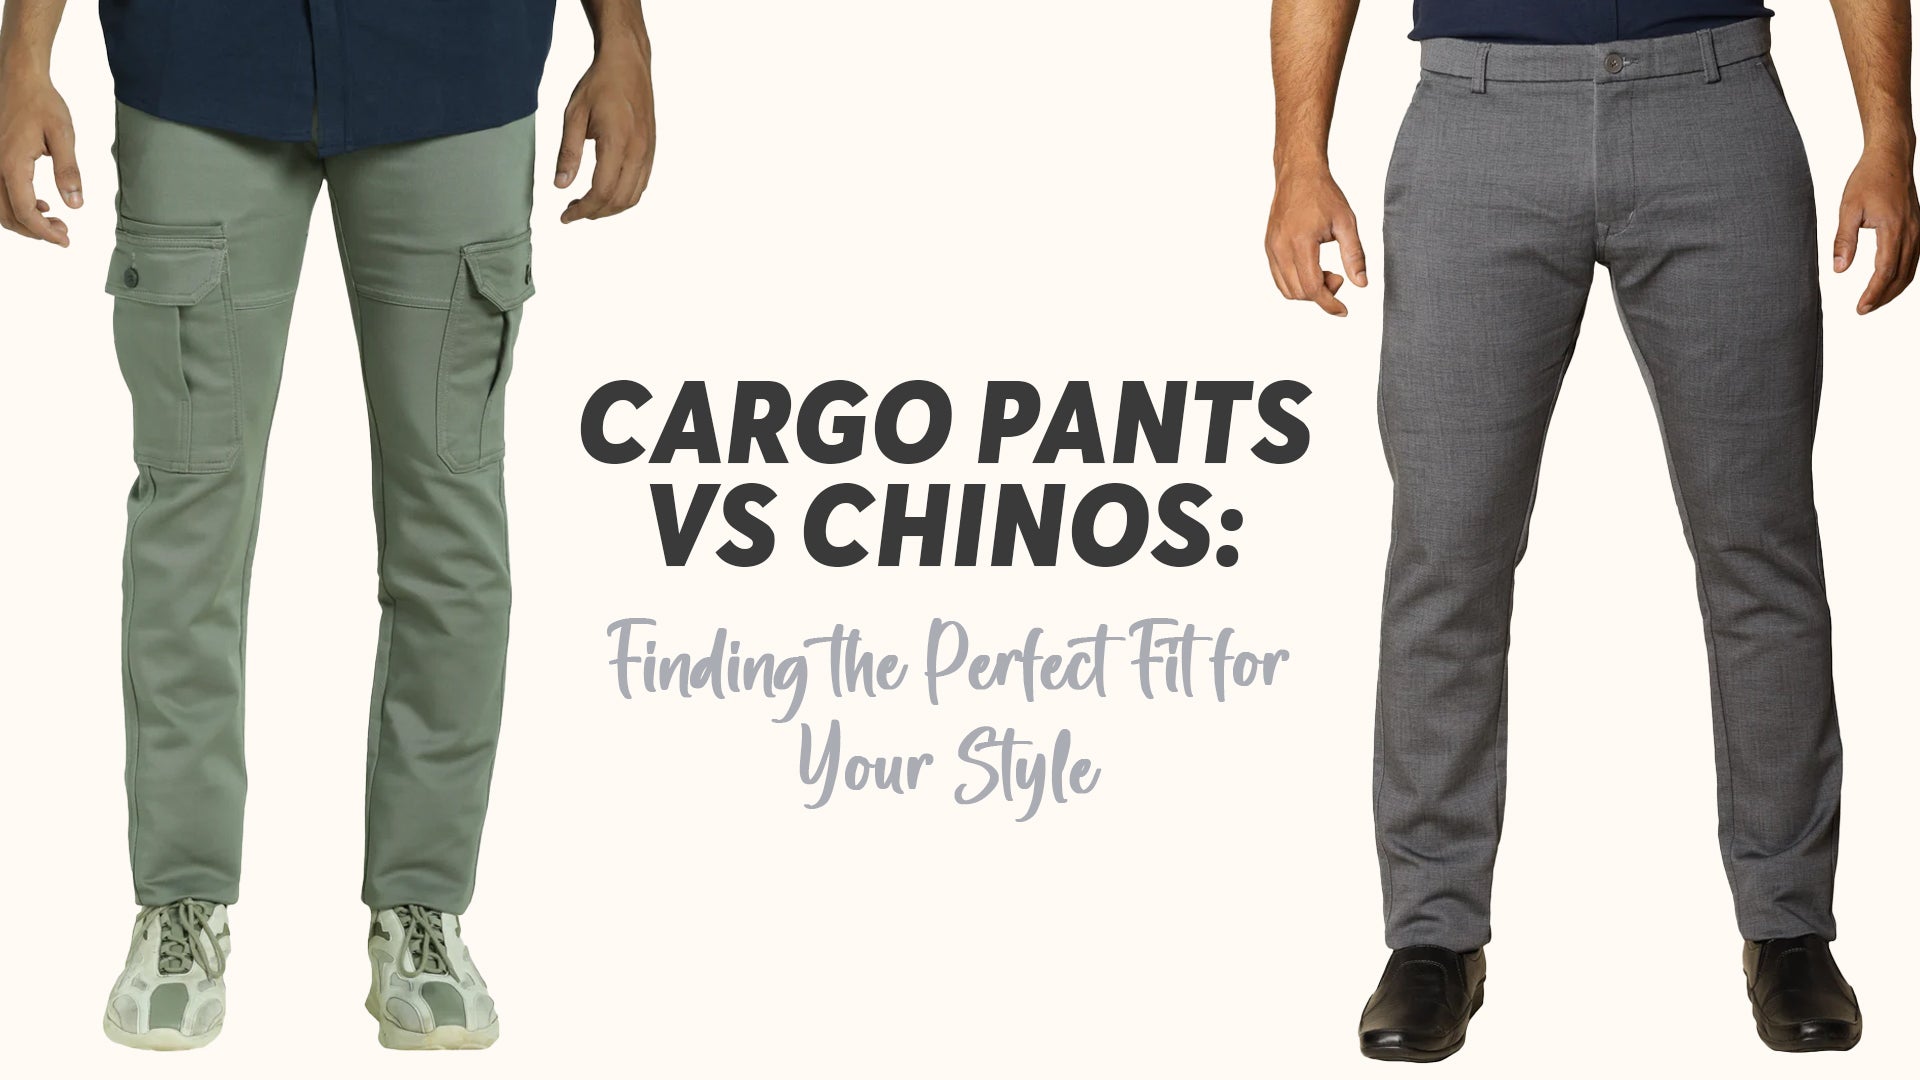 Pants for Kids, Cargos, Chinos & More